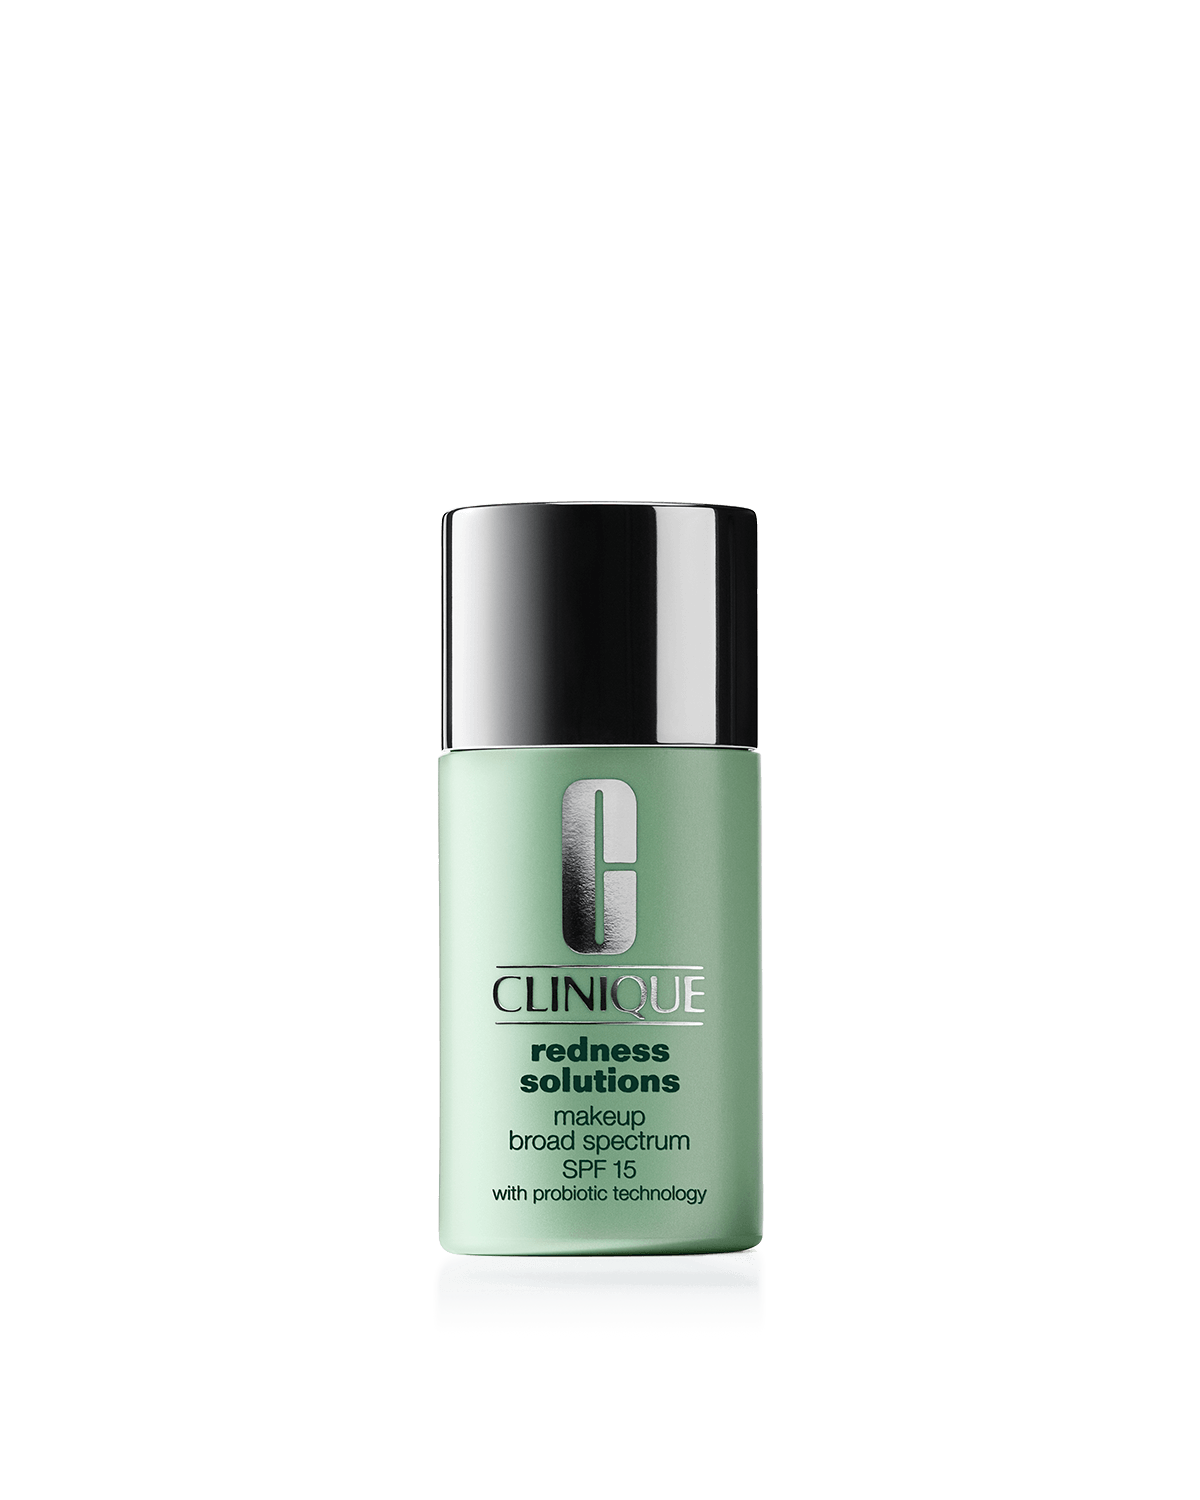 Foresee supplere Forsøg Redness Solutions Makeup Broad Spectrum SPF 15 With Probiotic Technology |  Clinique